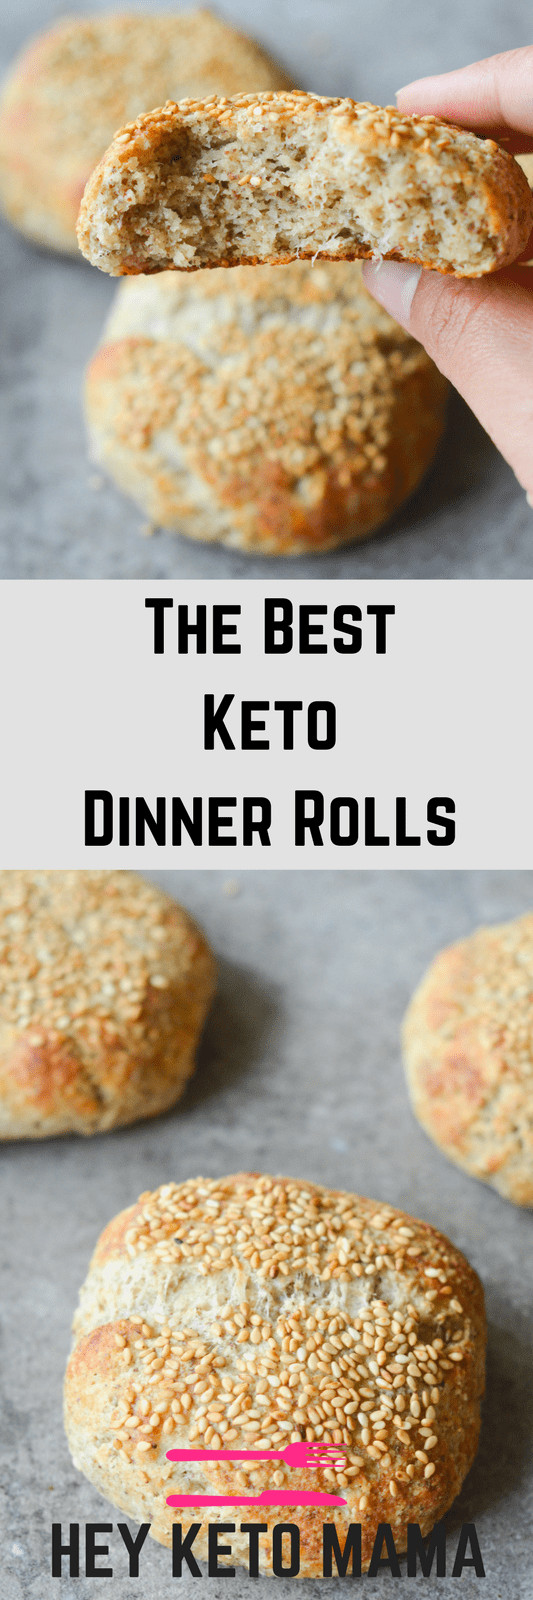 Keto Bread Rolls With Yeast
 The Best Dinner Rolls Your Life Recipe — Dishmaps